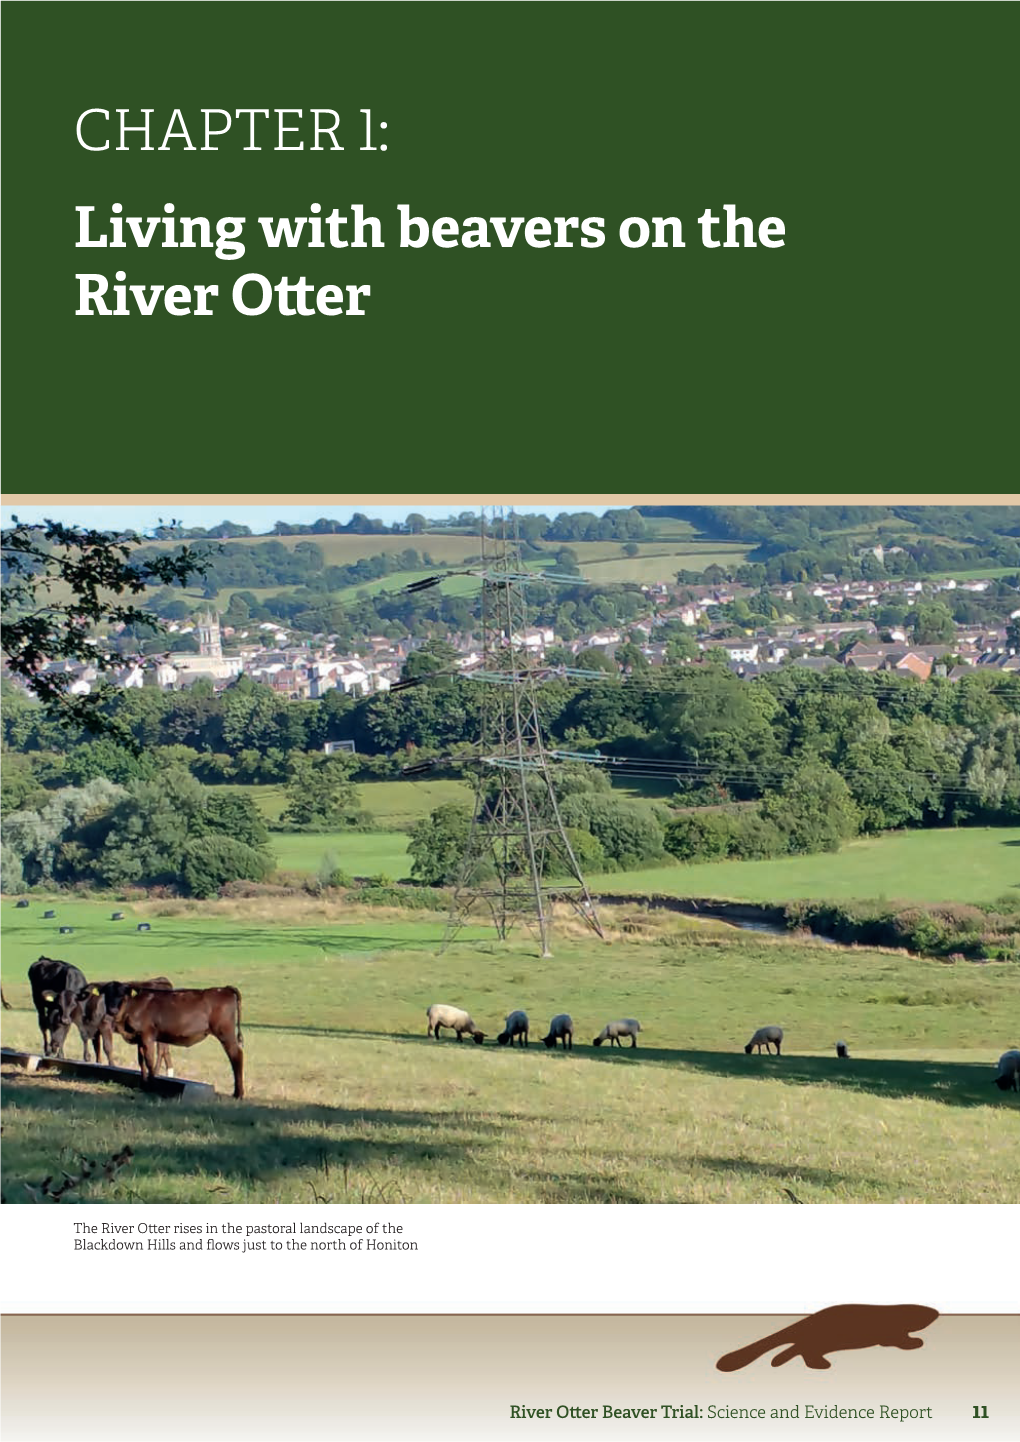 CHAPTER 1: Living with Beavers on the River Otter